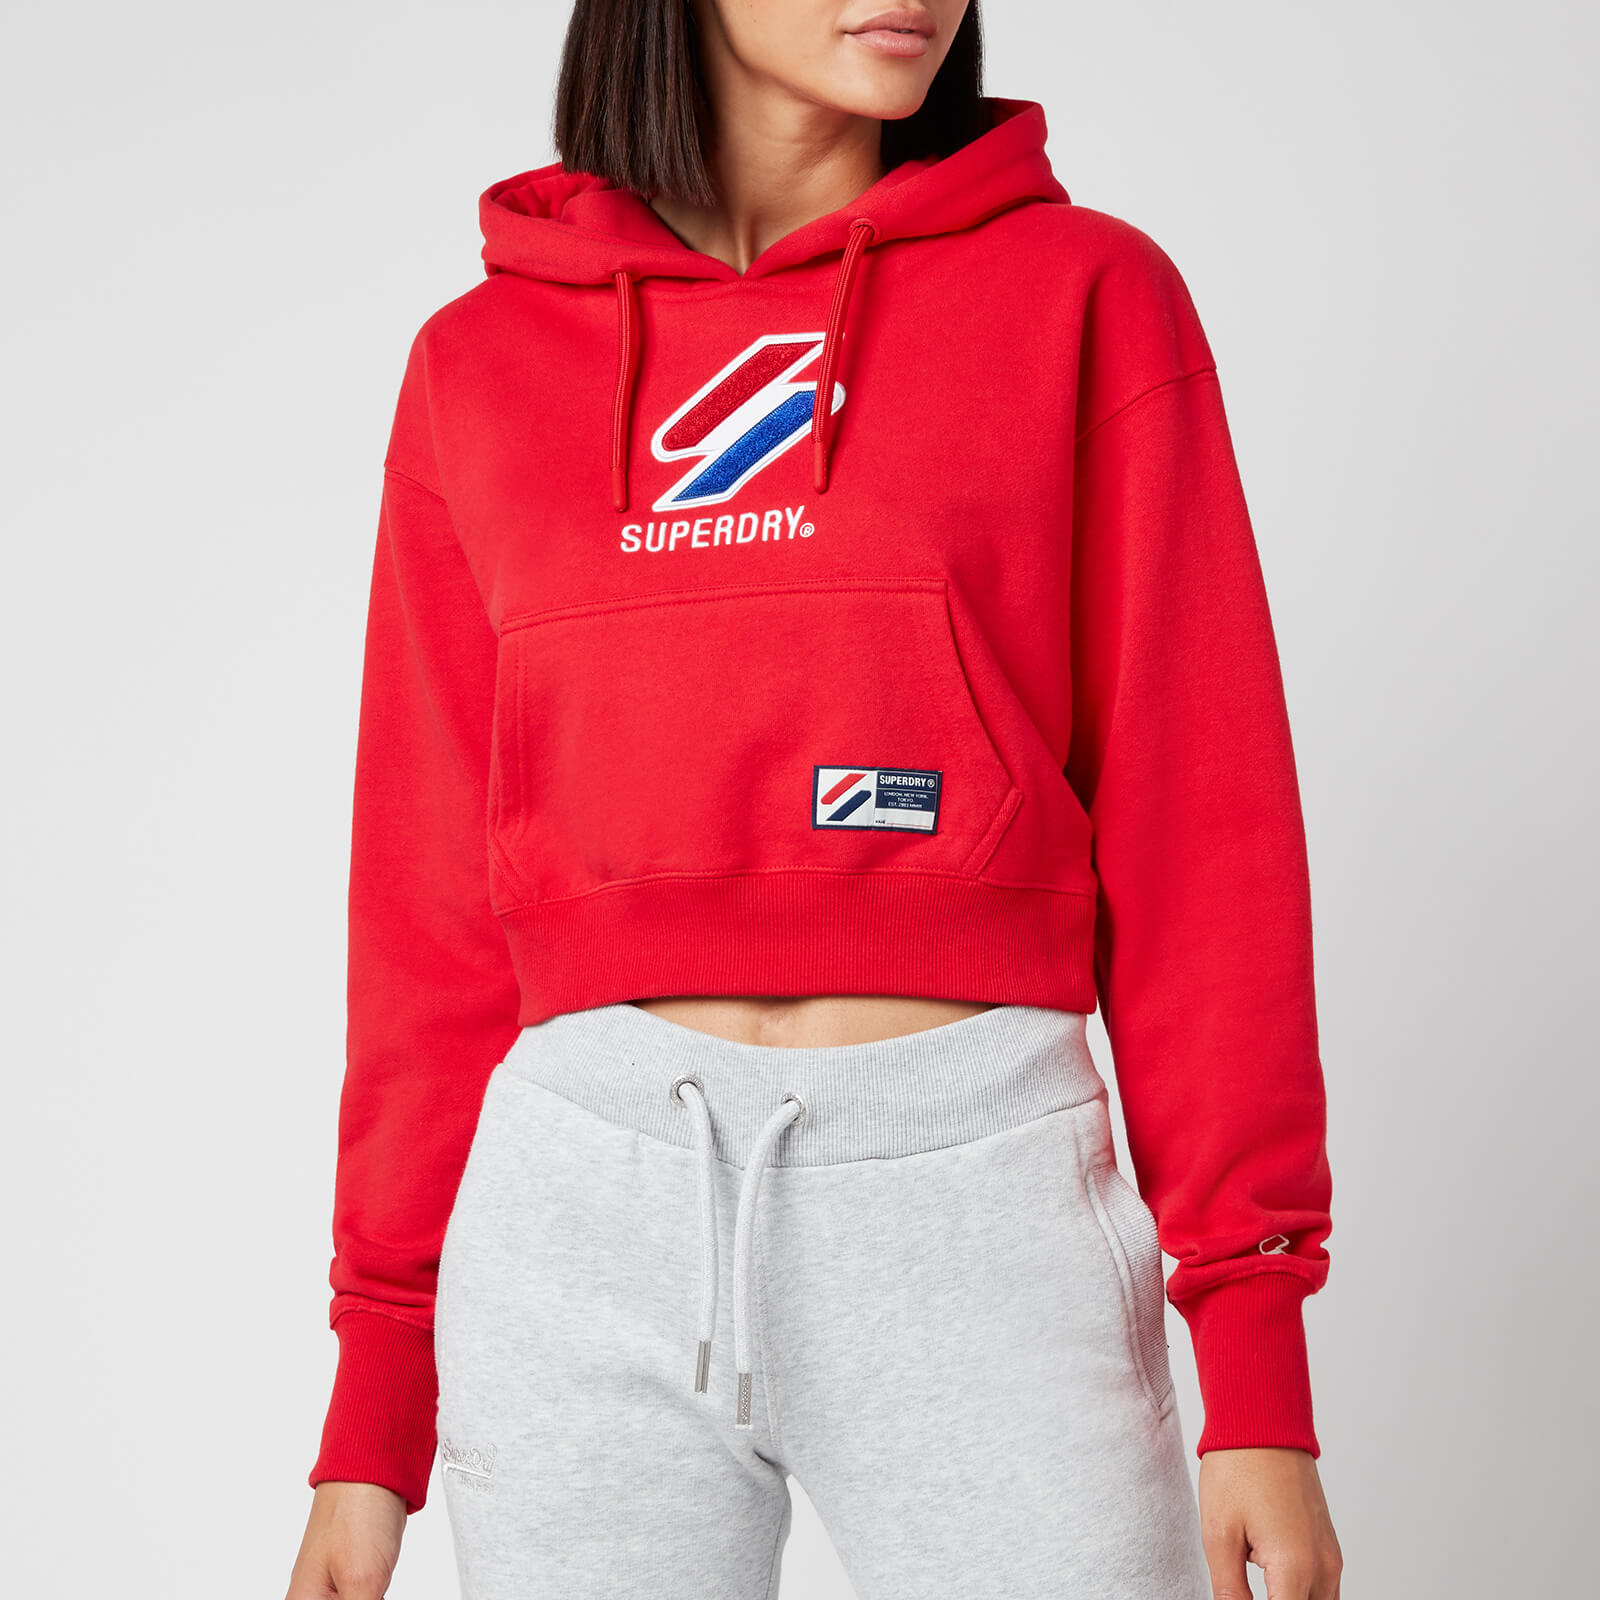 Superdry Women's Sportstyle Classic Boxy Hoodie - Risk Red - UK 8